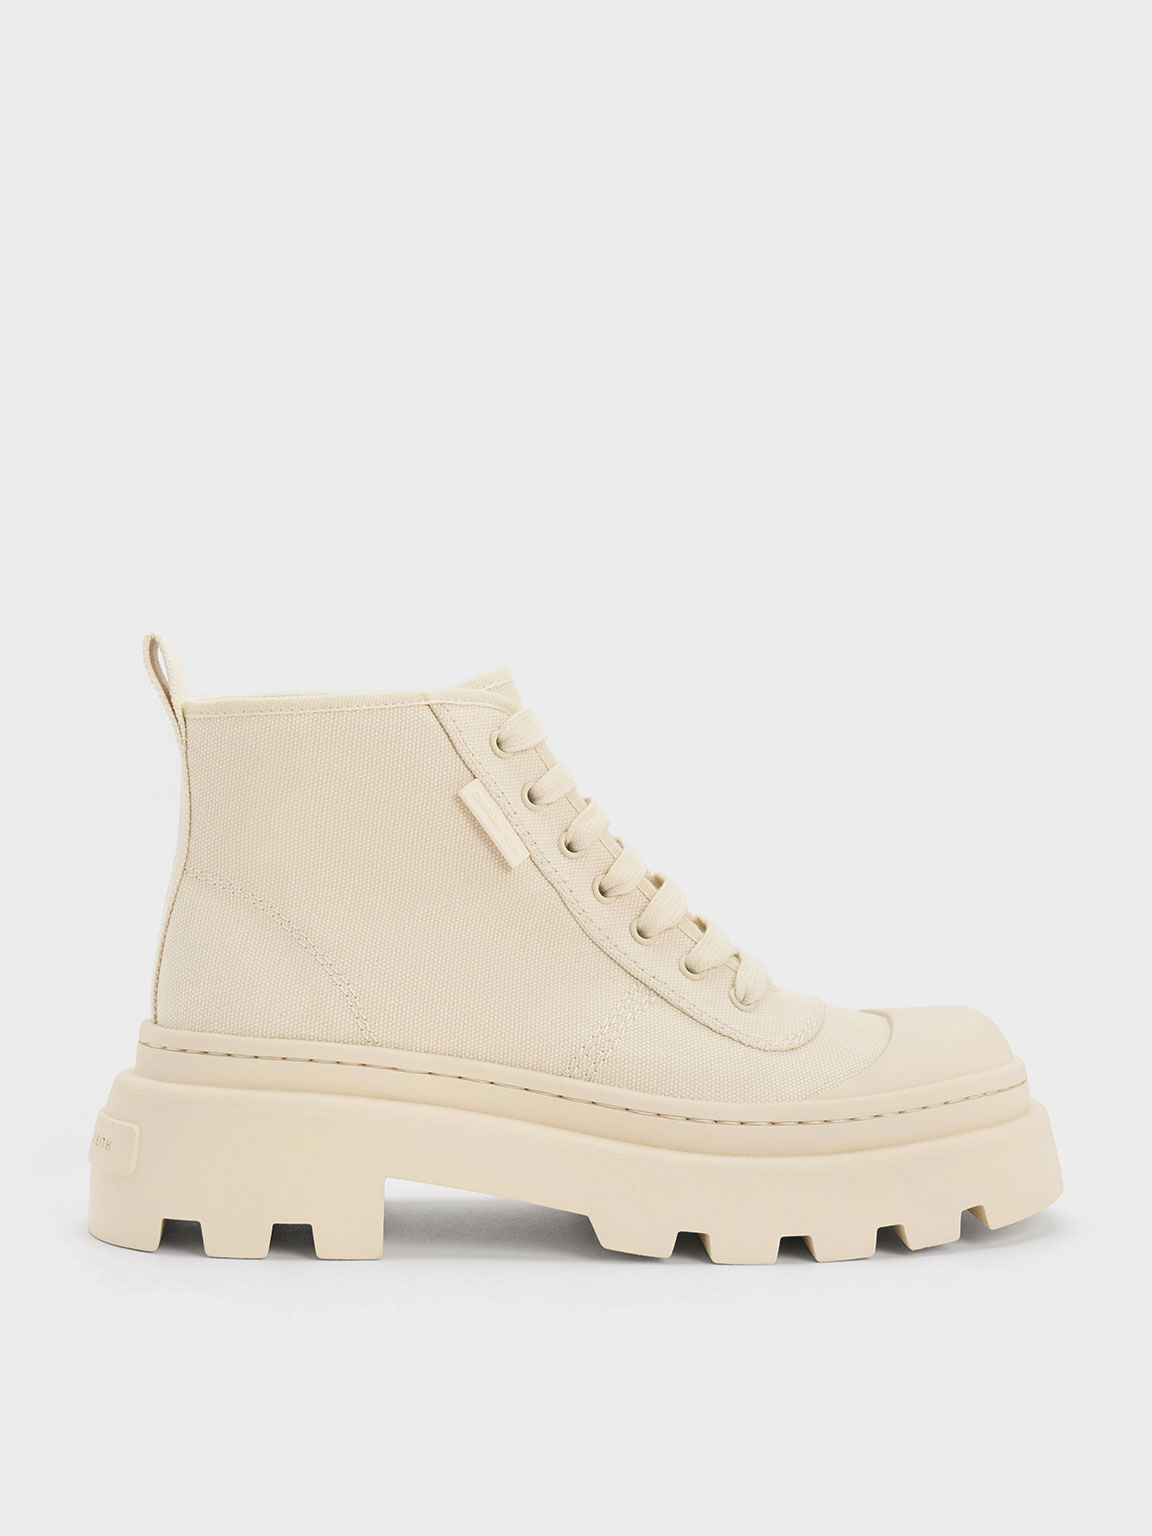 Women's Boots | Shop Exclusive Styles | CHARLES & KEITH US